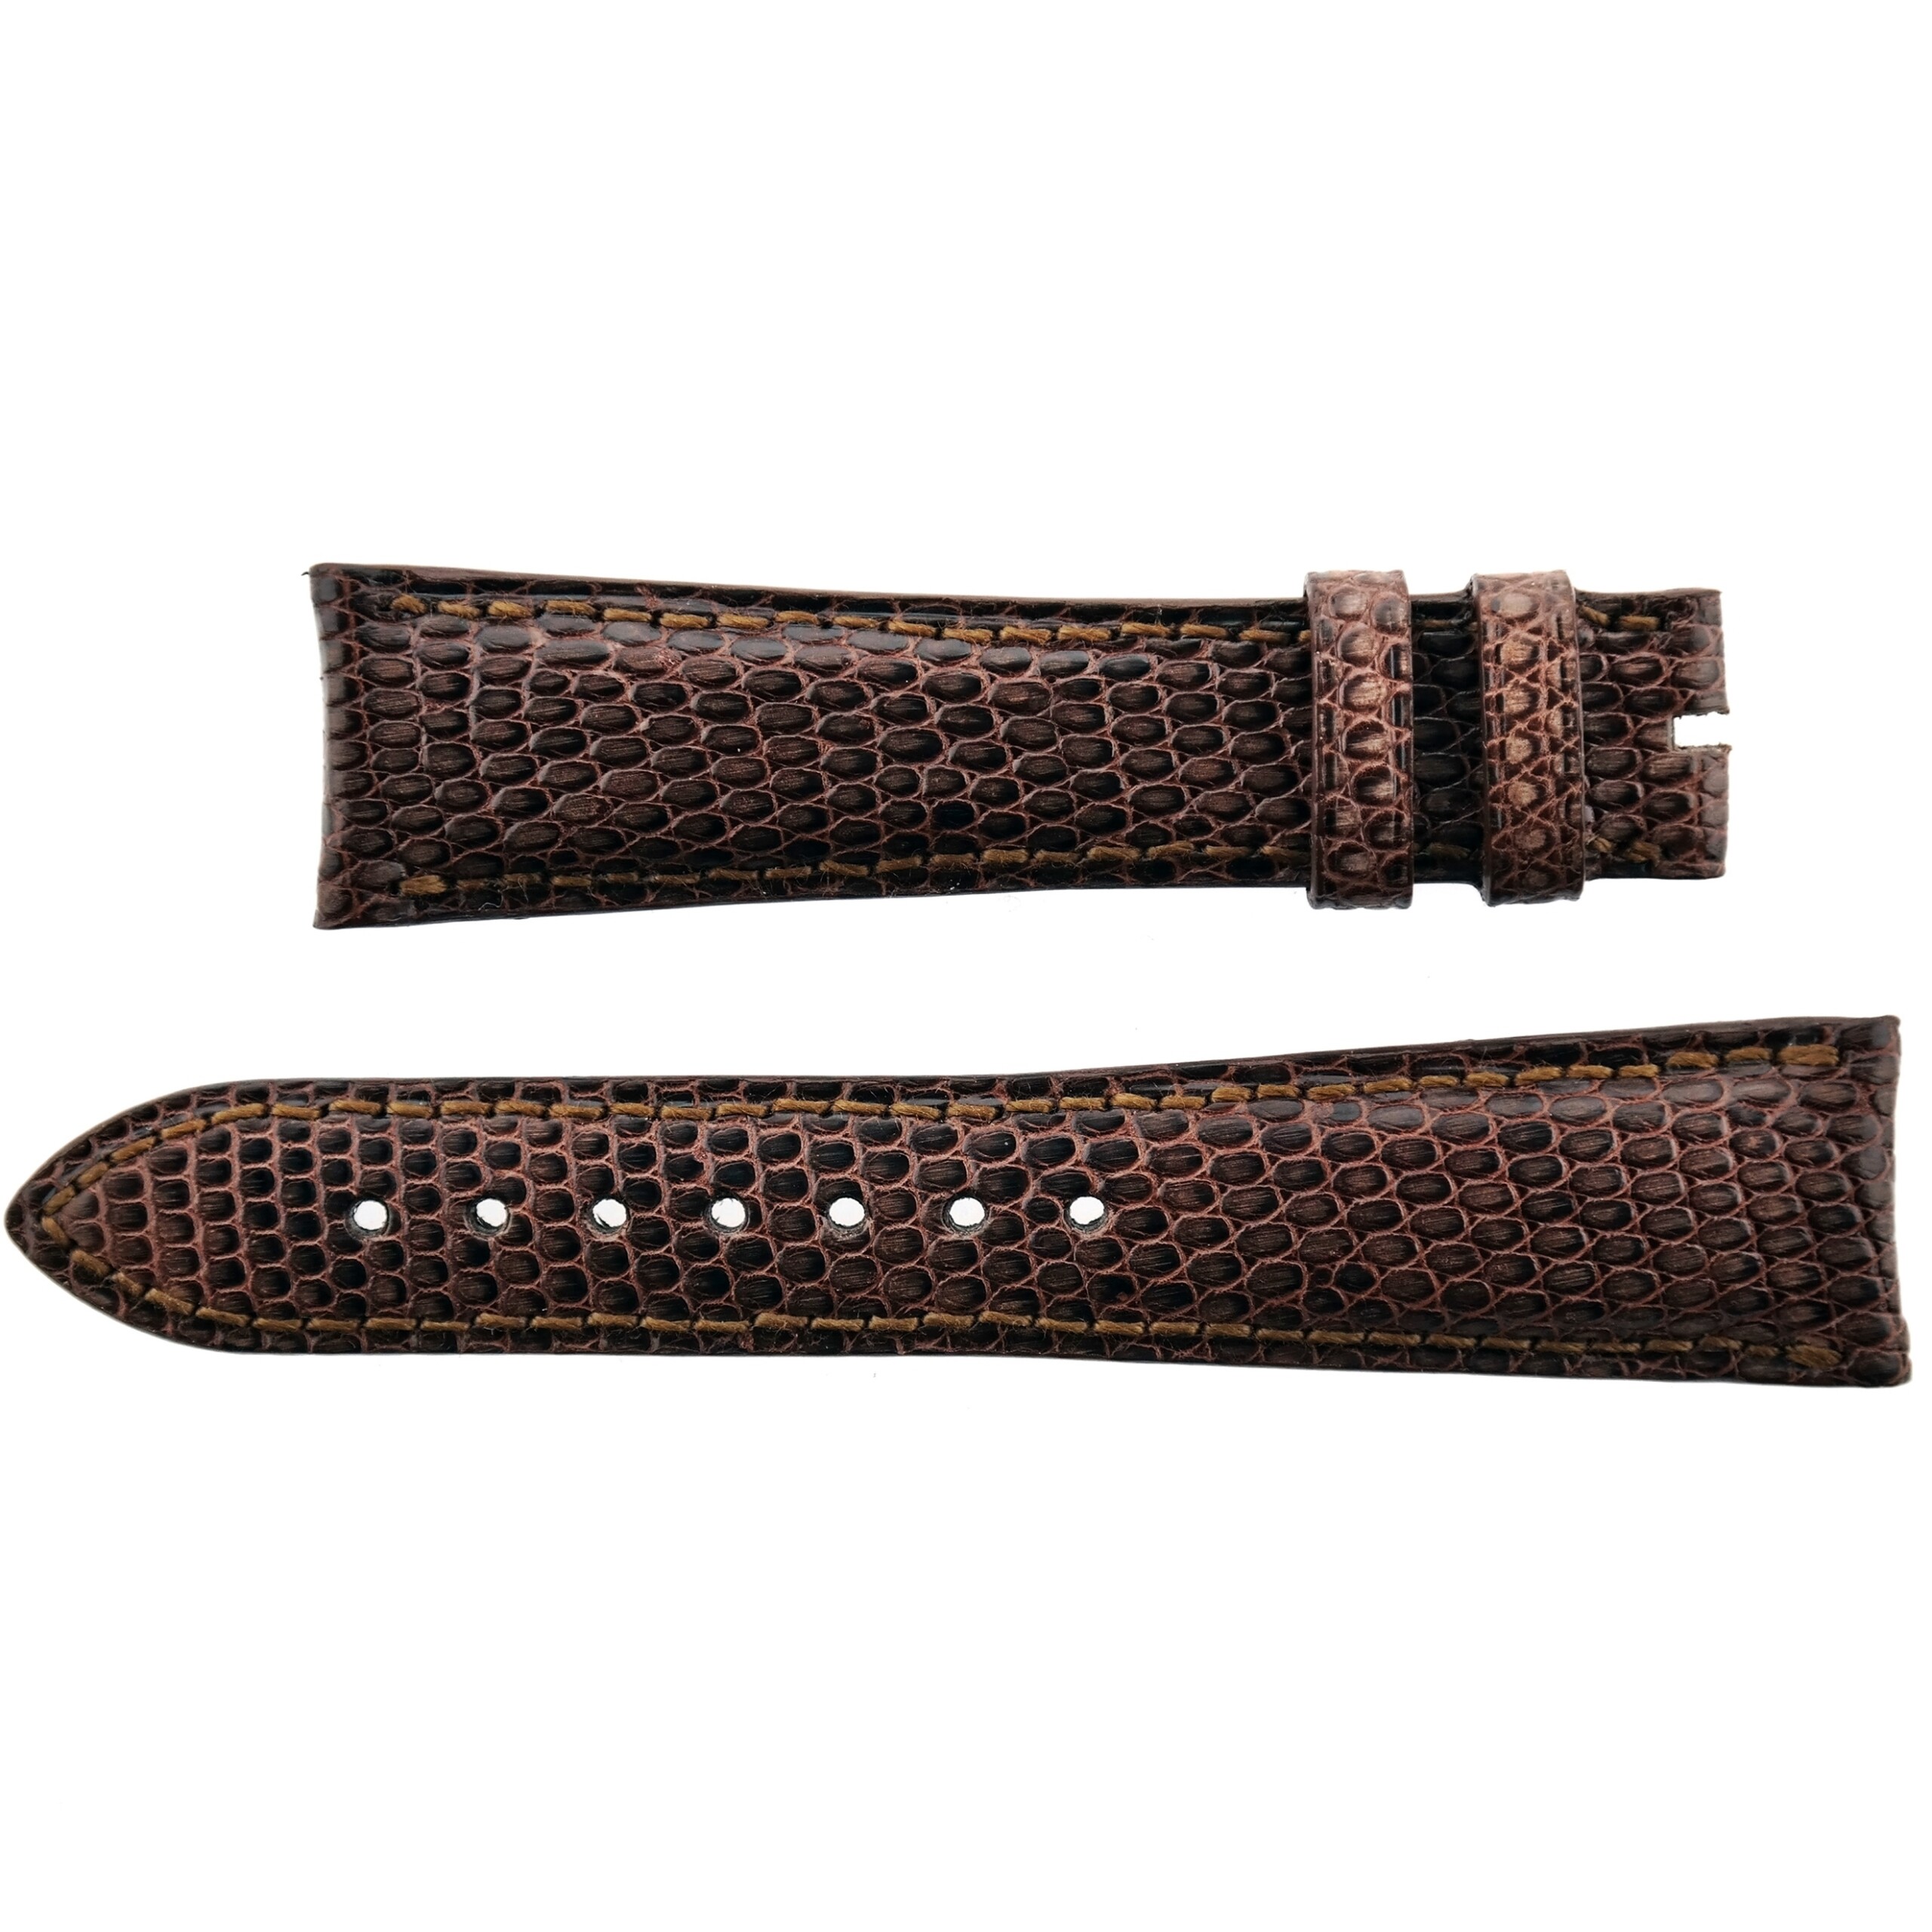 Authentic ZENITH - 18-510 - Leather Watch Strap - Hand Made - 18 mm